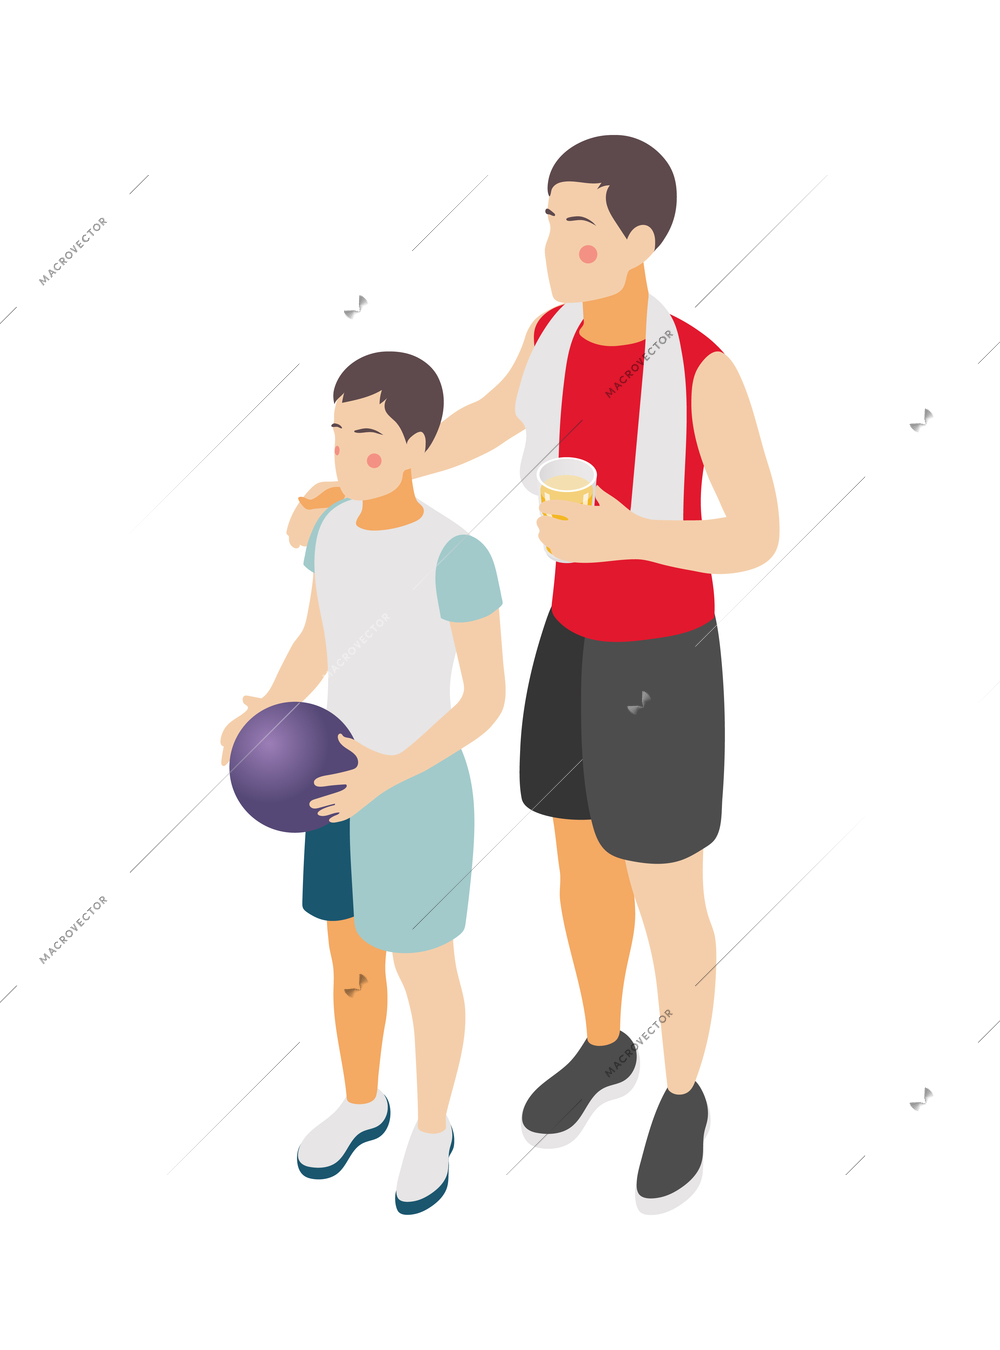 Family fitness isometric icon with father and son doing sport together playing ball 3d vector illustration